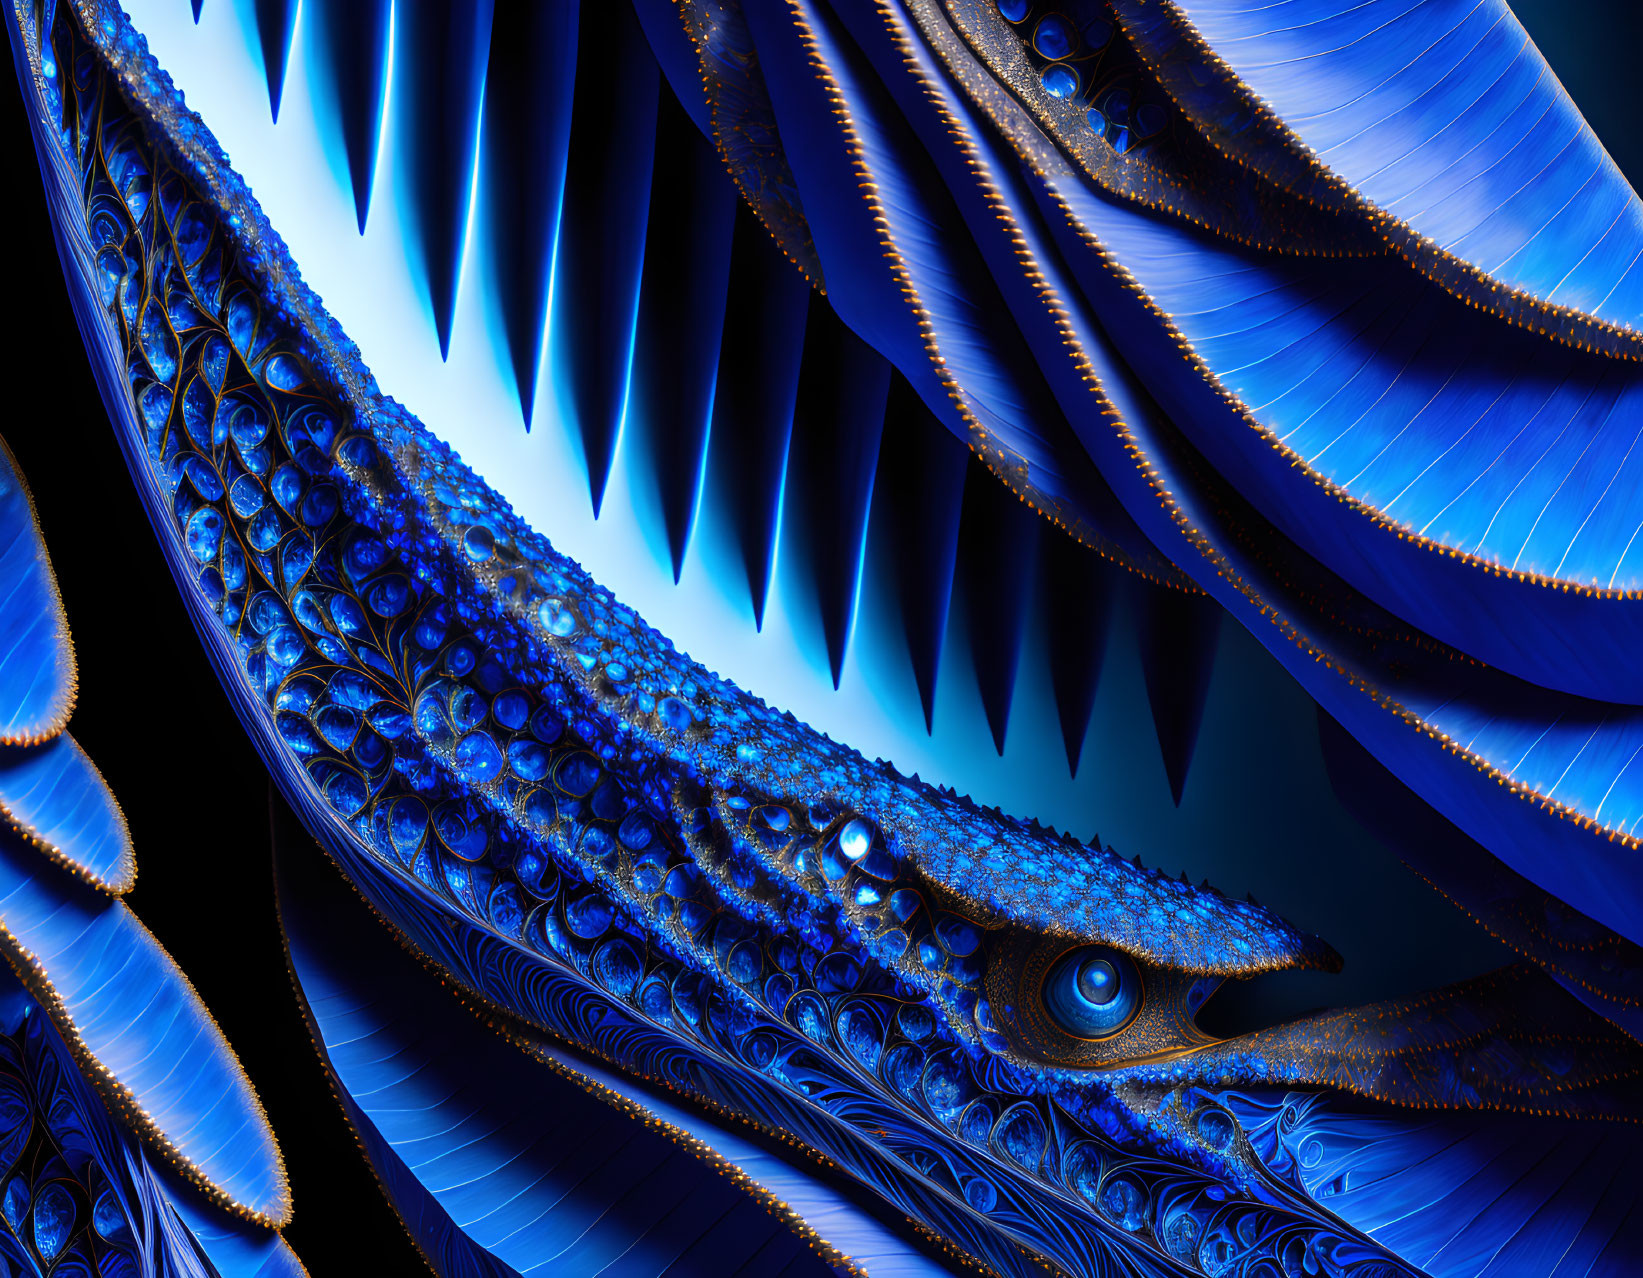 Blue and Black Abstract Fractal Art Resembling Peacock Feathers